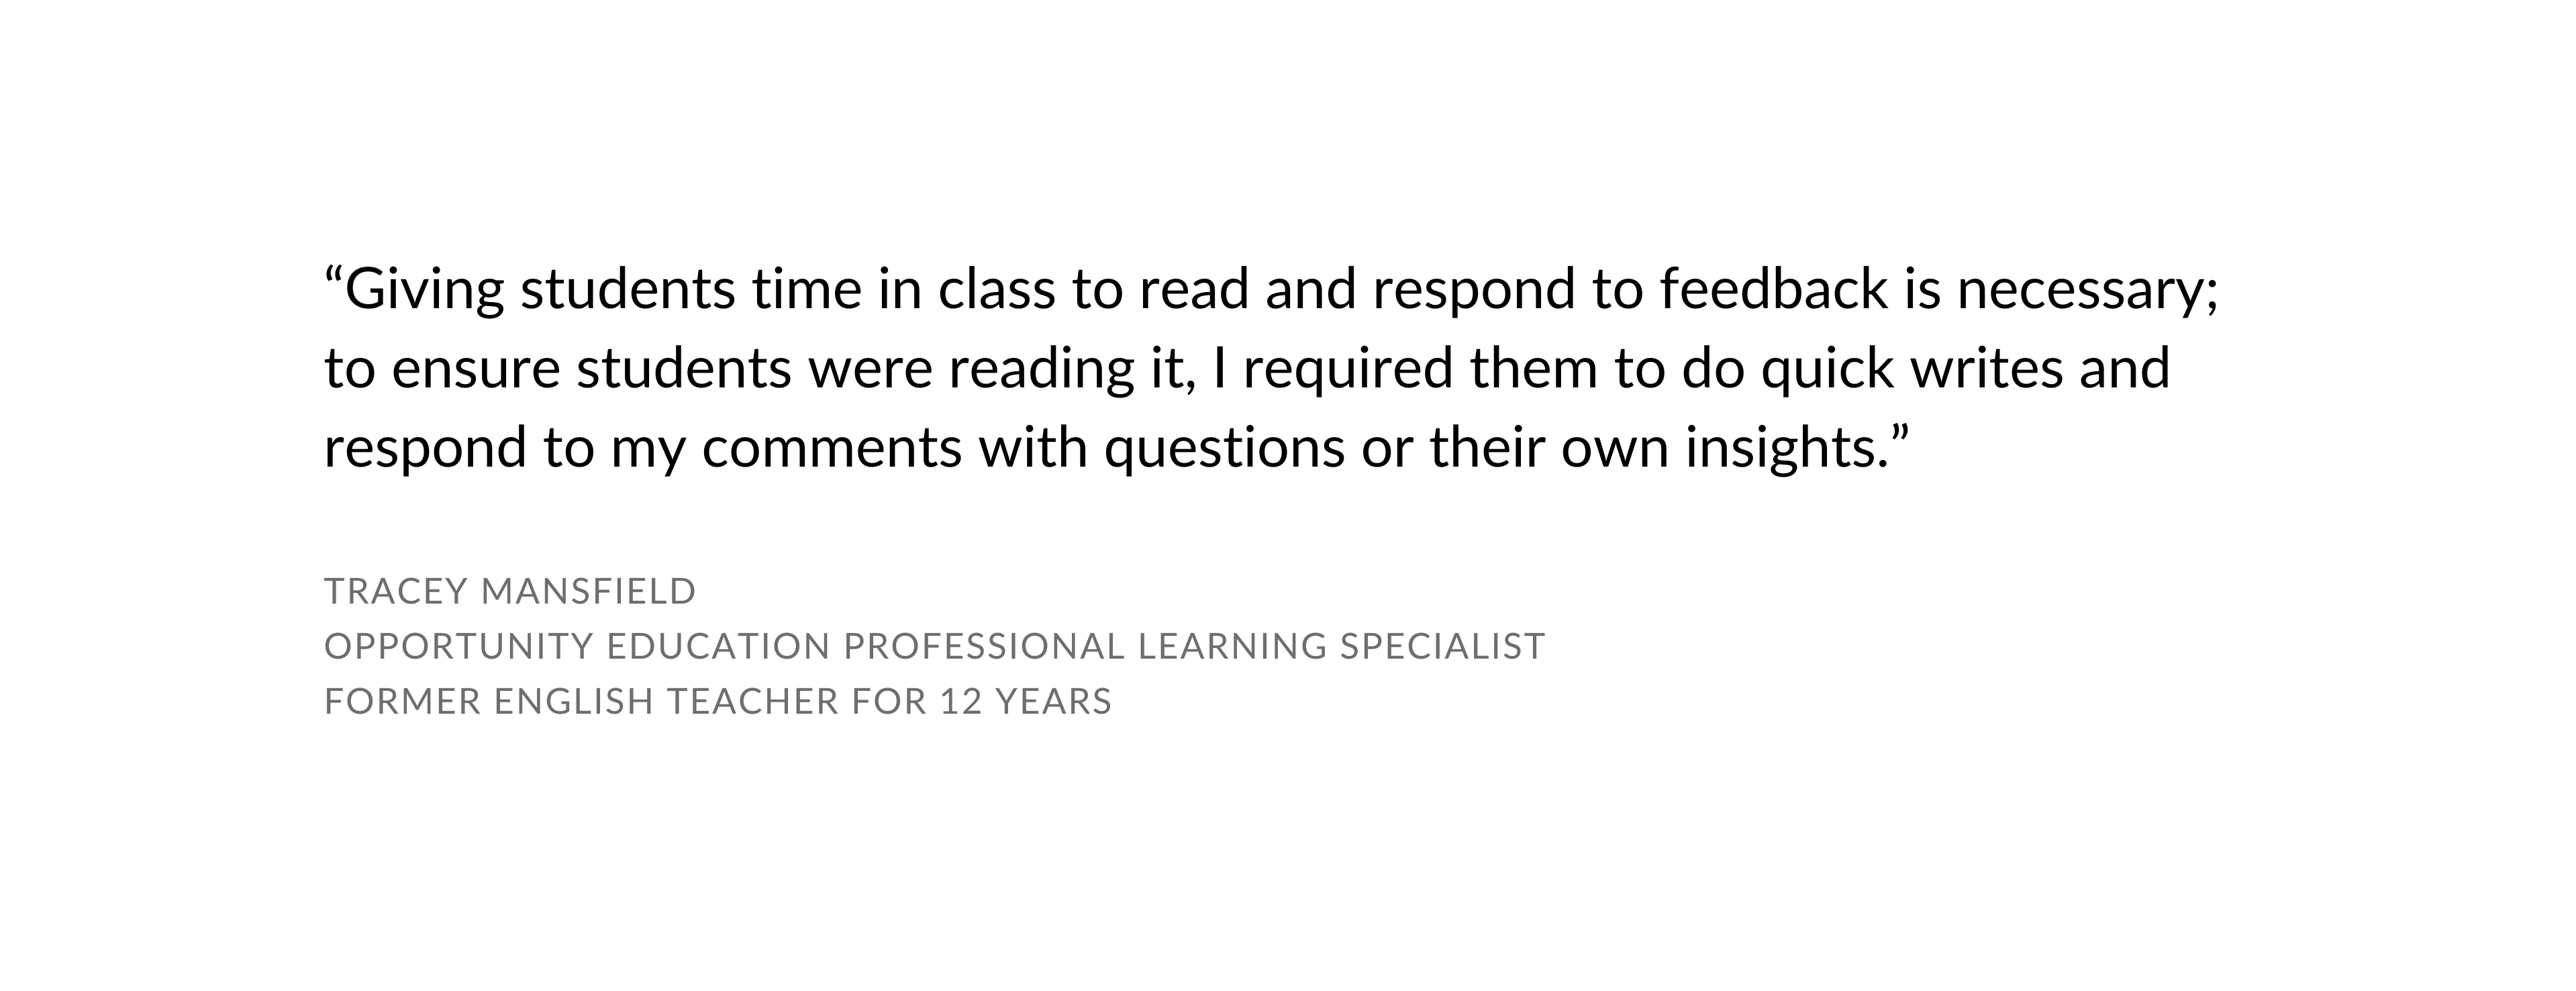 Giving students time in class to read and respond to feedback is necessary; to ensure students were reading it, I required them to do quick writes and respond to my comments with questions or their own insights. - Tracey Mansfield, OE Professional Learning Specialist, former English teacher for 12 years